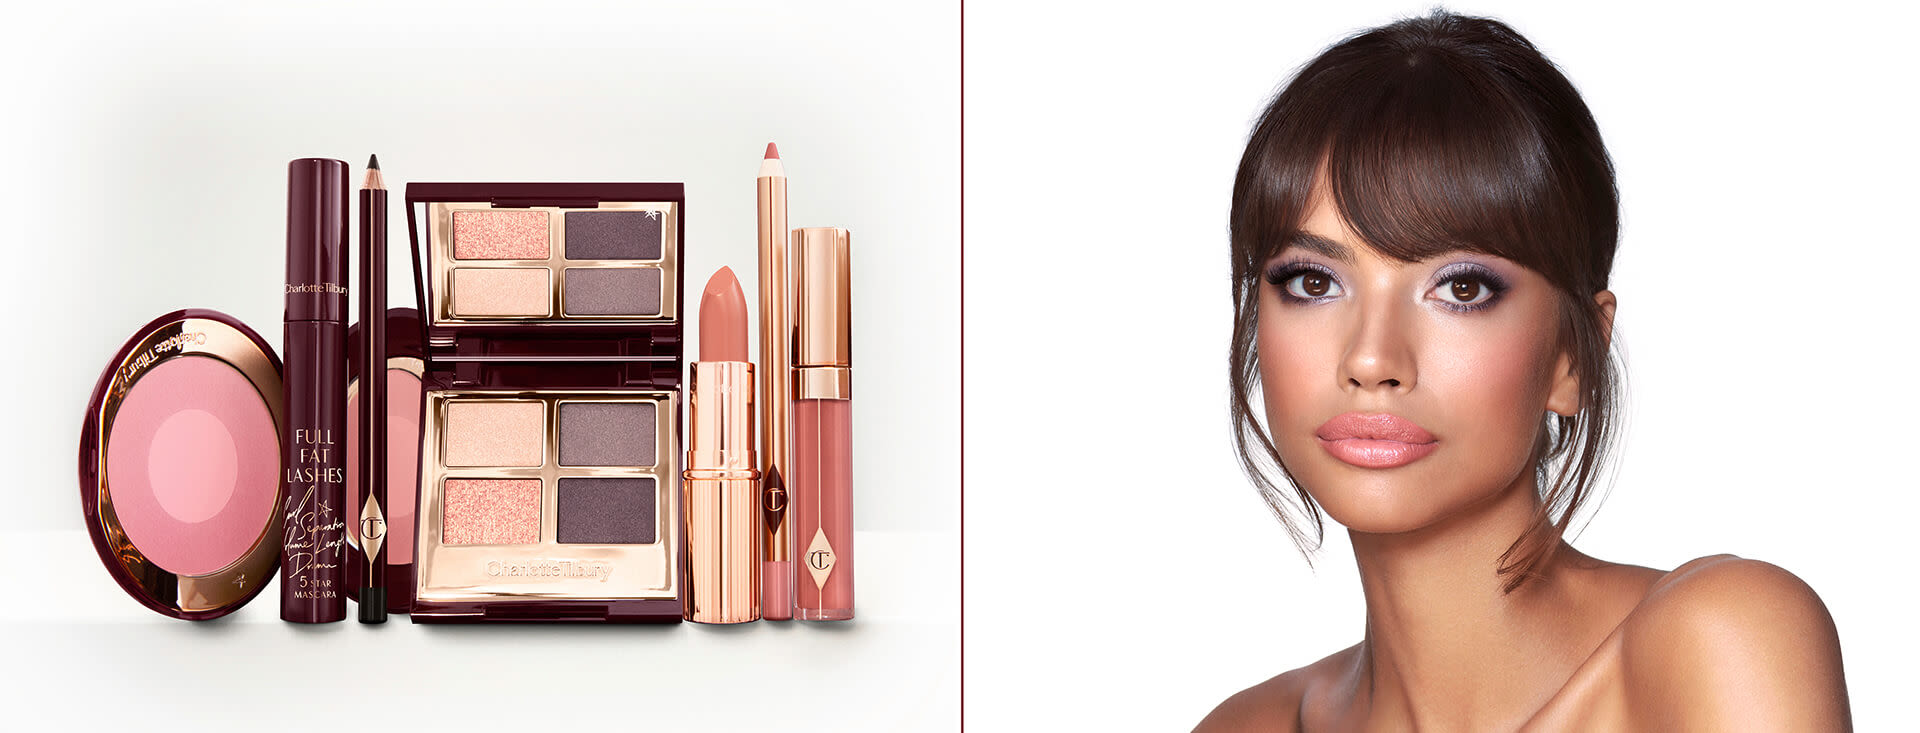 A medium-tone model with brown eyes wearing shimmery lilac and champagne eye makeup with nude pink blush and coral lipstick with gloss on top, along with an open, mirrored-lid eyeshadow palette in matte and shimmery gold and grey shades, an open black eyeliner pencil, a mascara in a dark-crimson colour scheme, a golden-peach lipstick with a matching lip liner pencil, coral lip gloss, and an open two-tone blush in cool pink. 